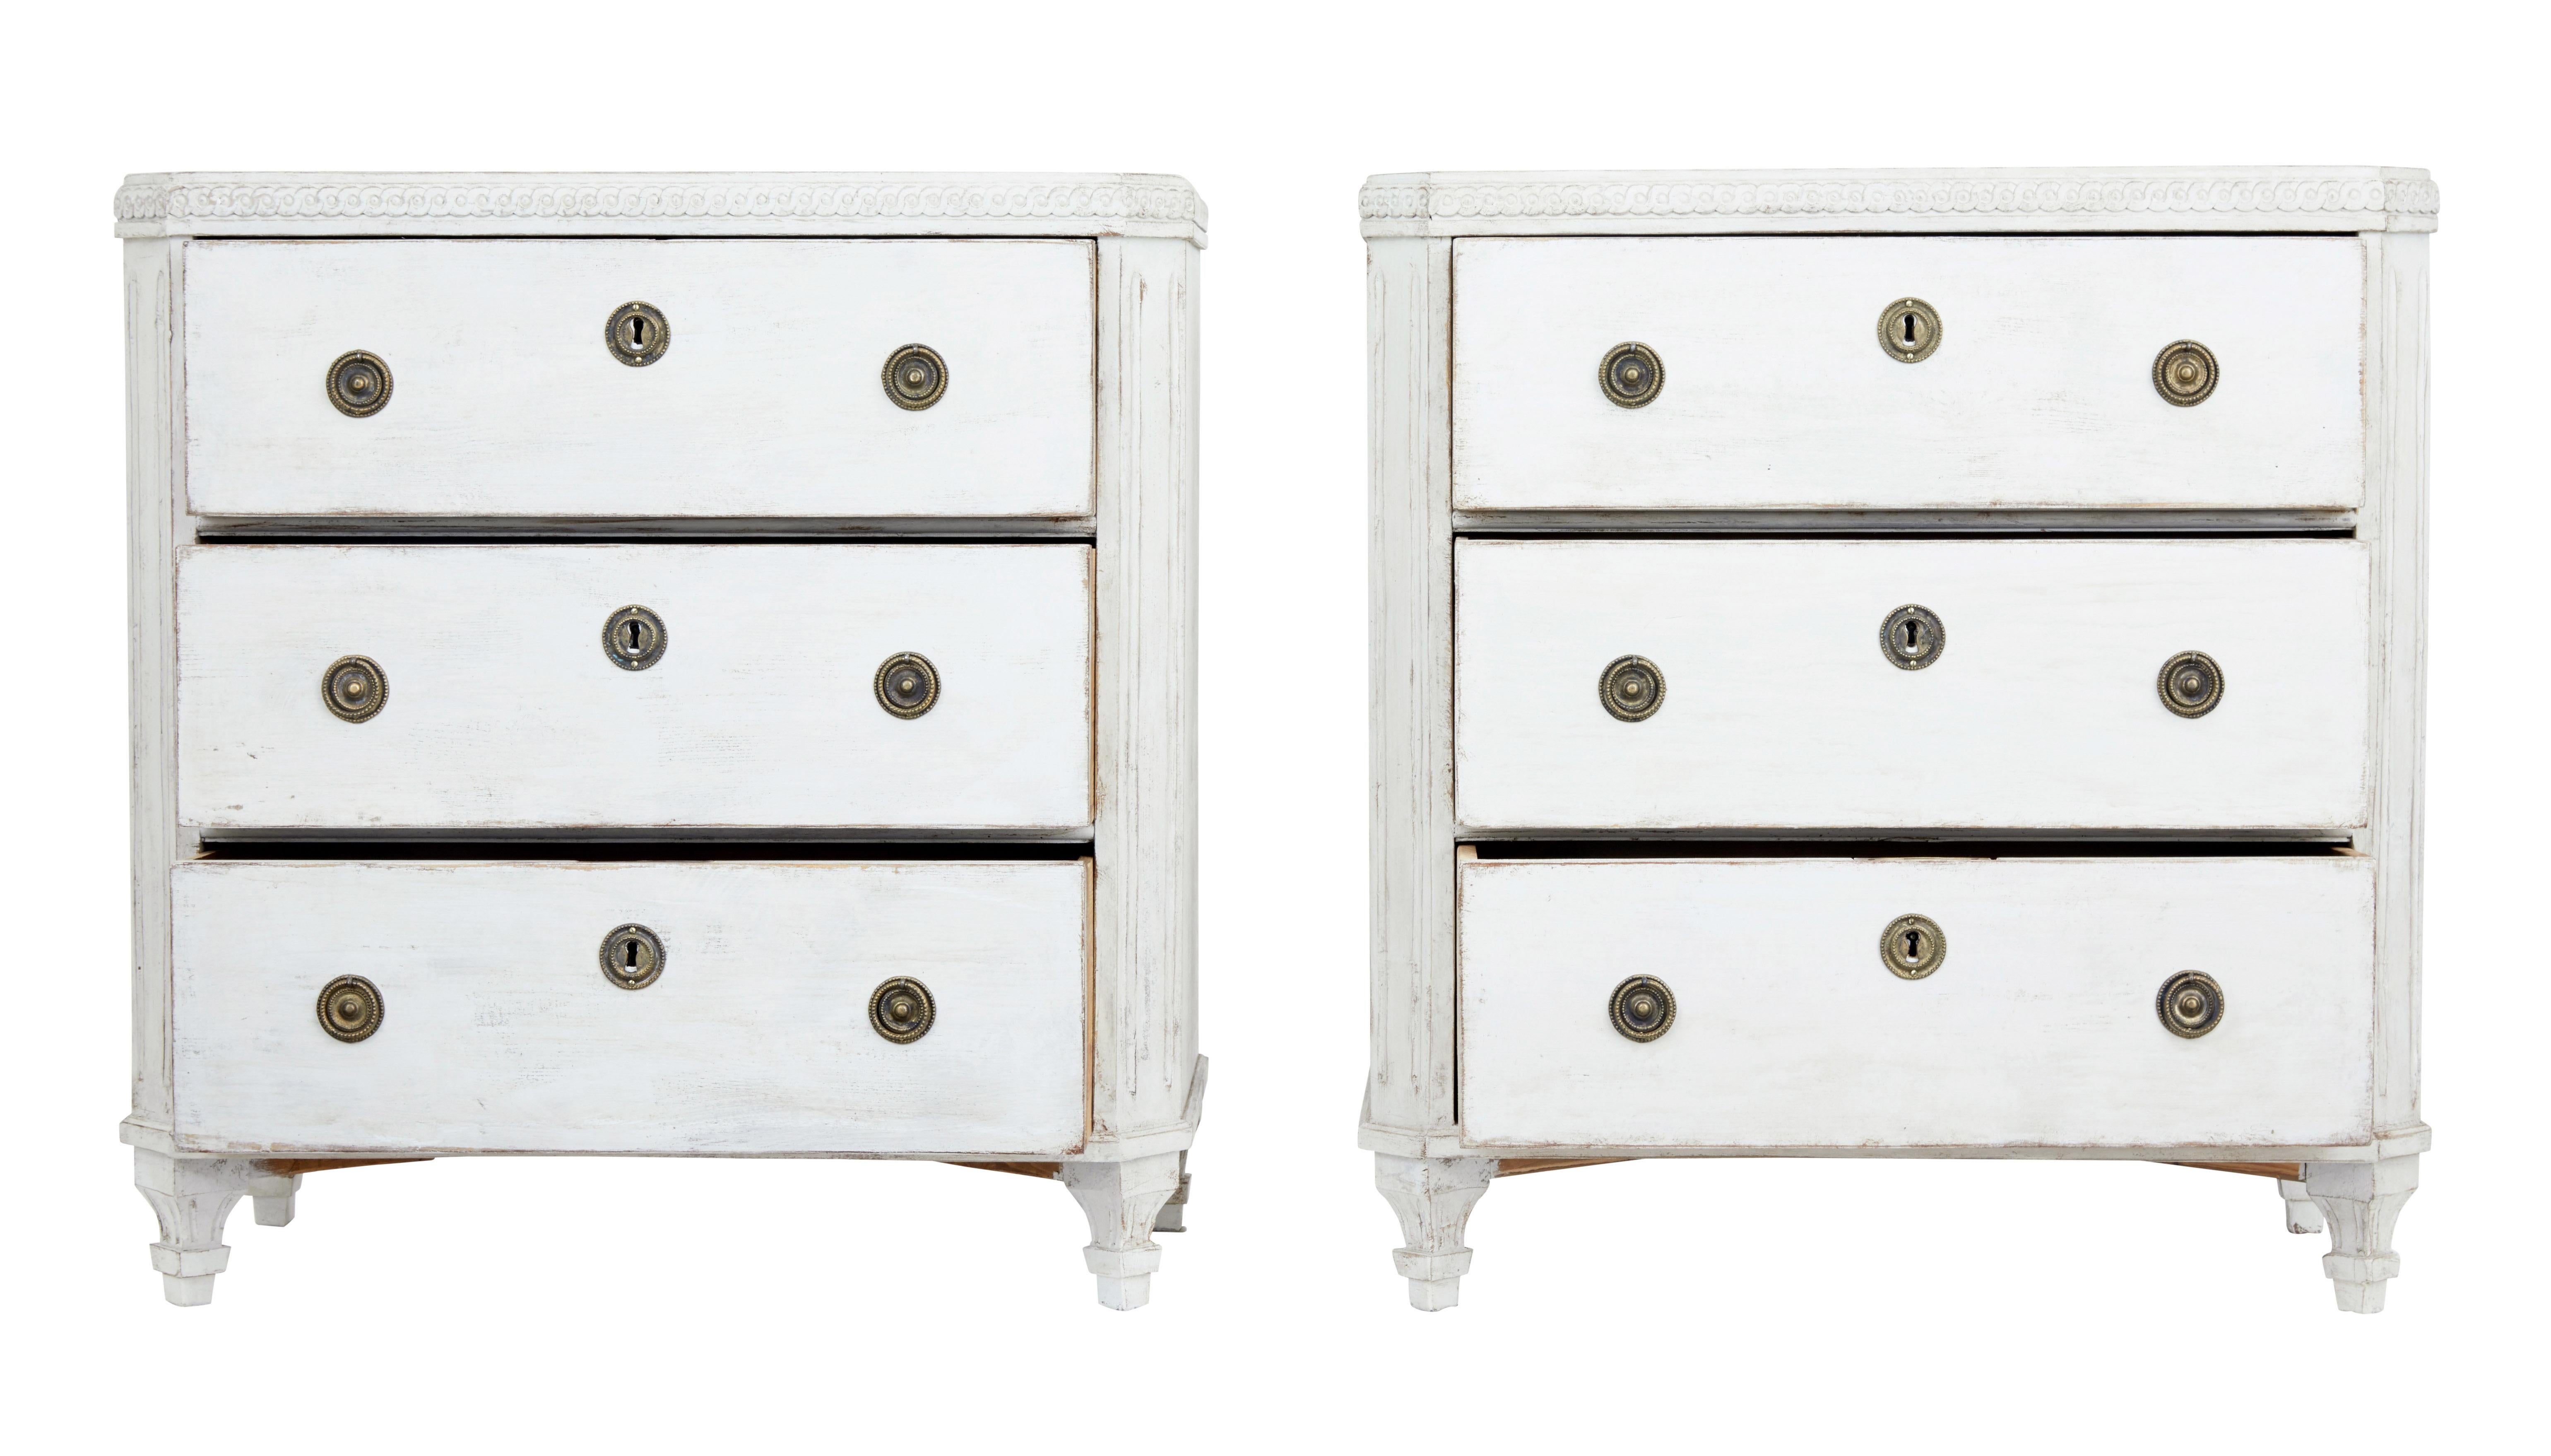 Pair of painted Swedish commodes, circa 1880.

Carved scrolling detail the top surface. Canted corners with fluted detail. 3 drawers with brass ring handles and escutheons.

Standing on detailed tapered legs.

Later paint and hardware,